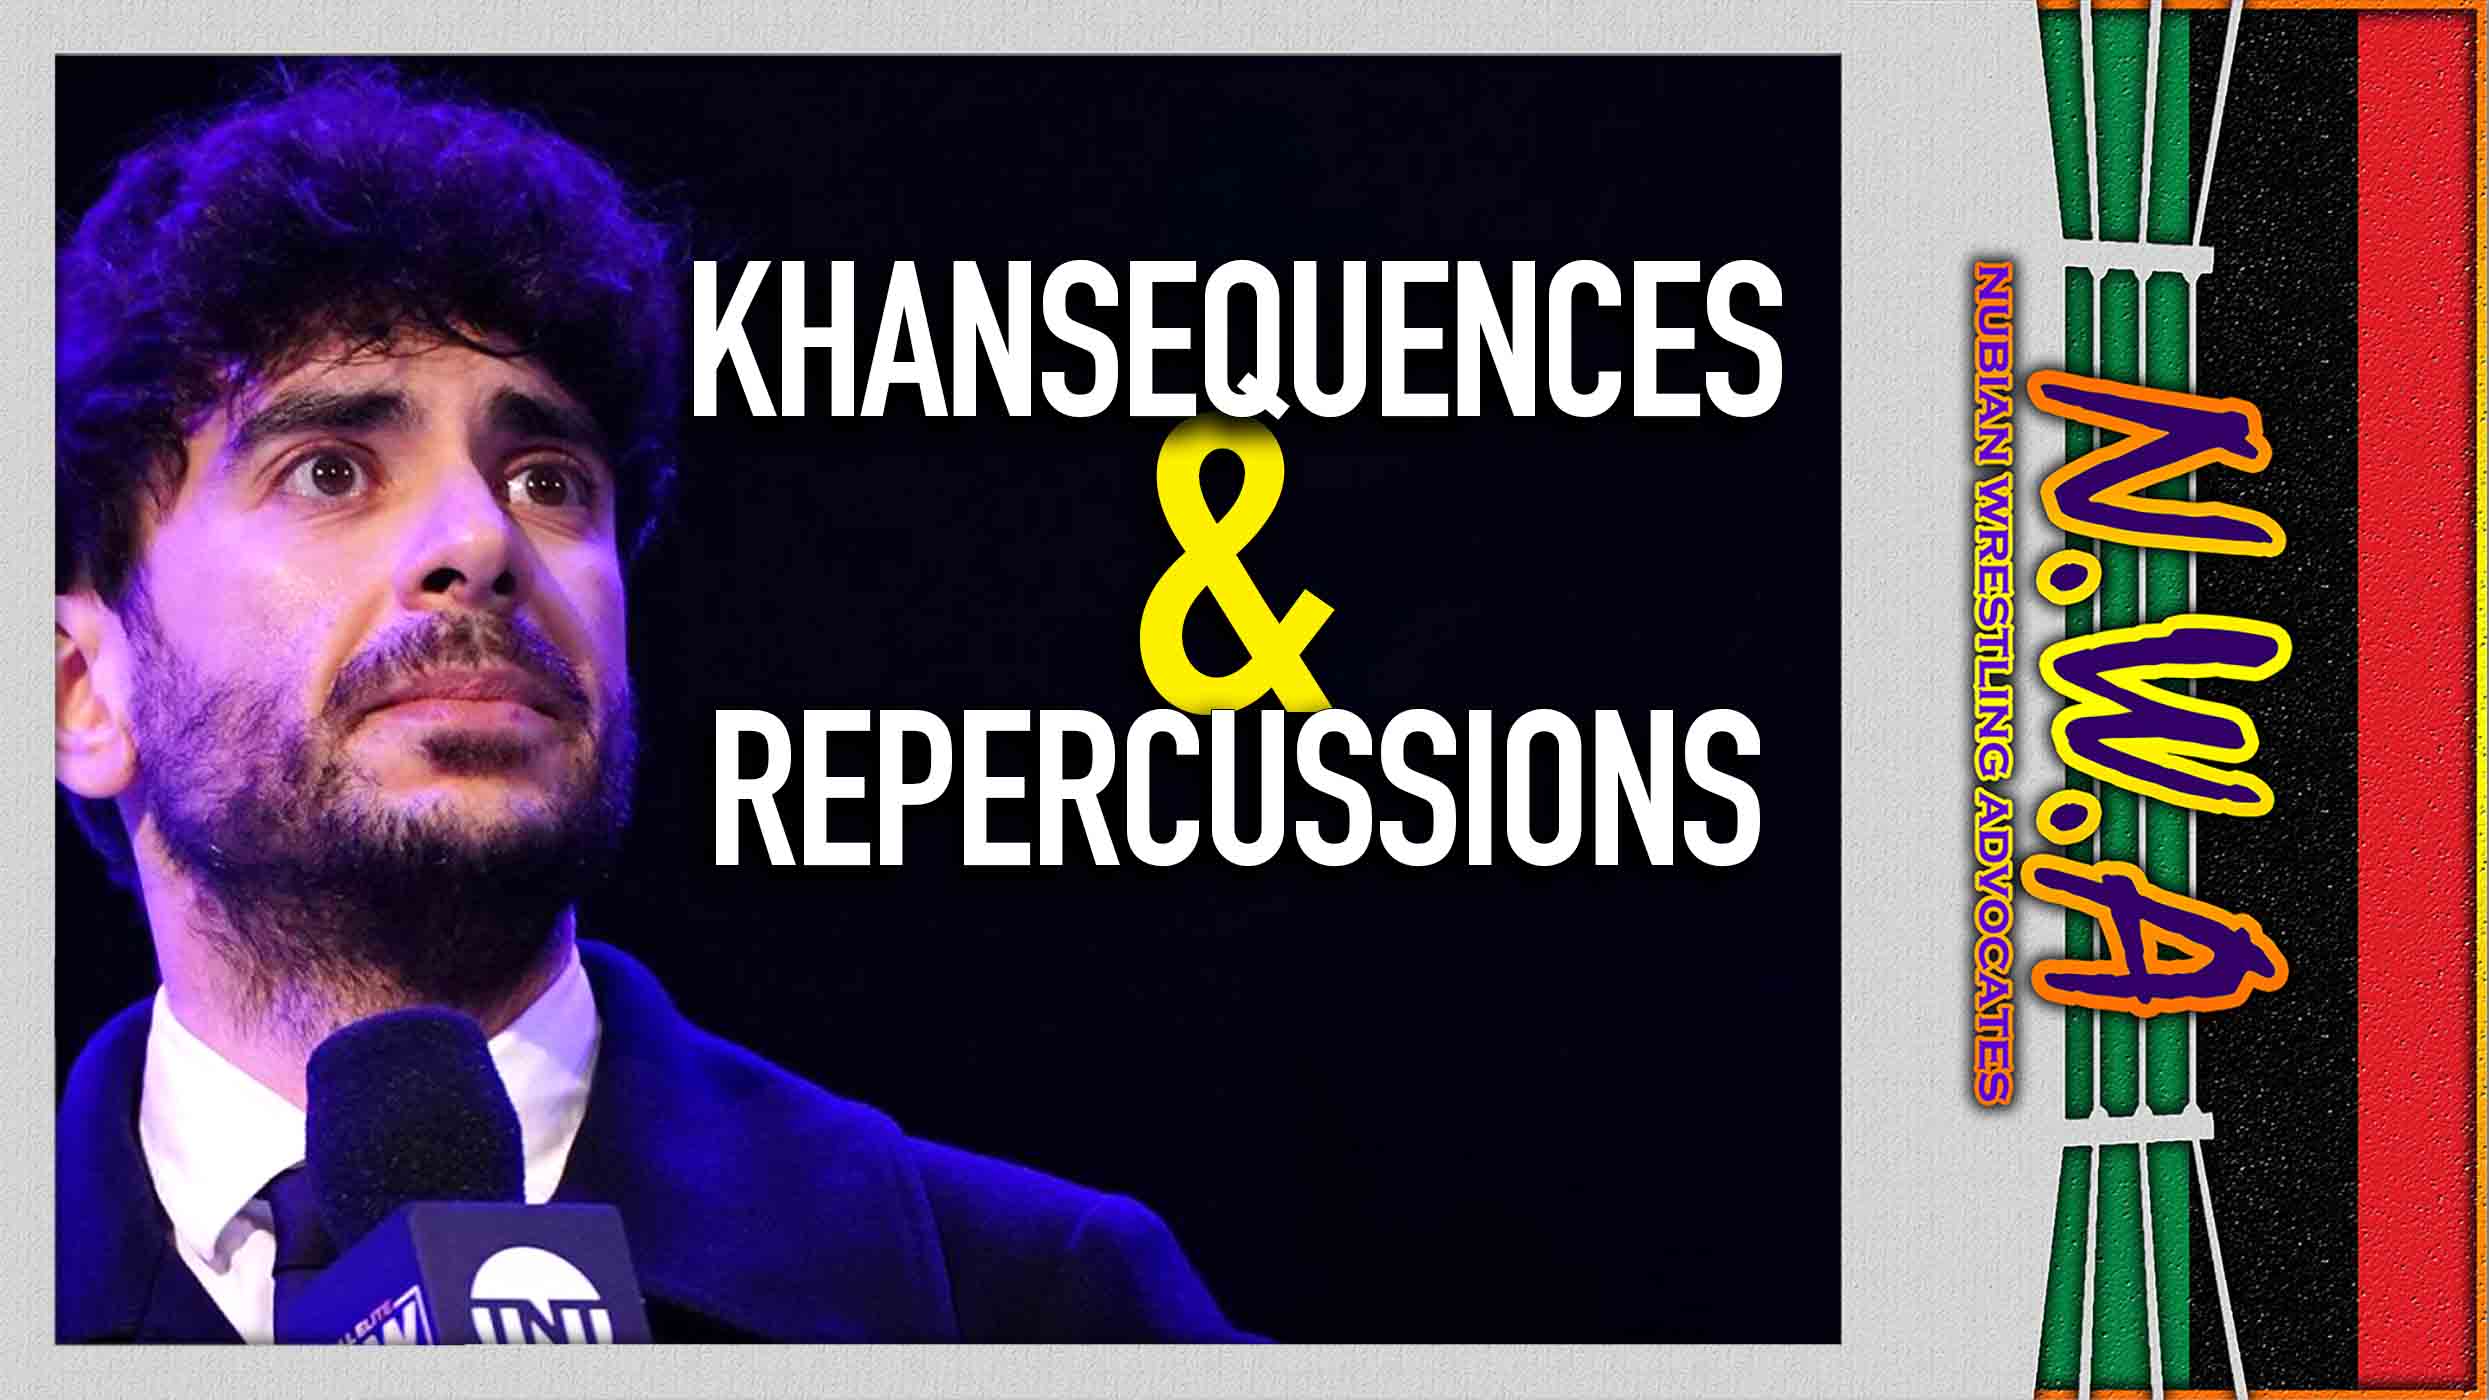 The N.W.A. Podcast: Khansequences & Repercussions - POST Wrestling | WWE NXT AEW NJPW UFC Podcasts, News, Reviews